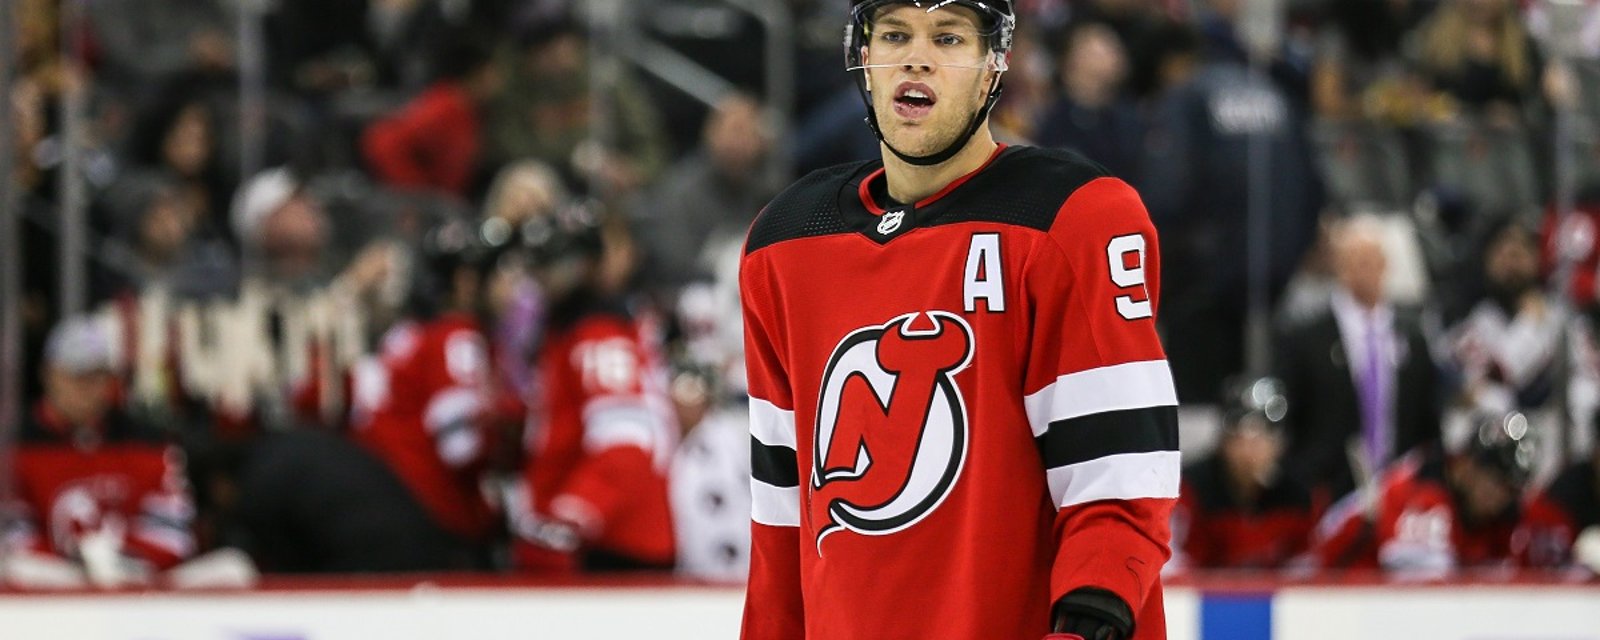 Devils officially update Taylor Hall's status ahead of tonight's game in Arizona.